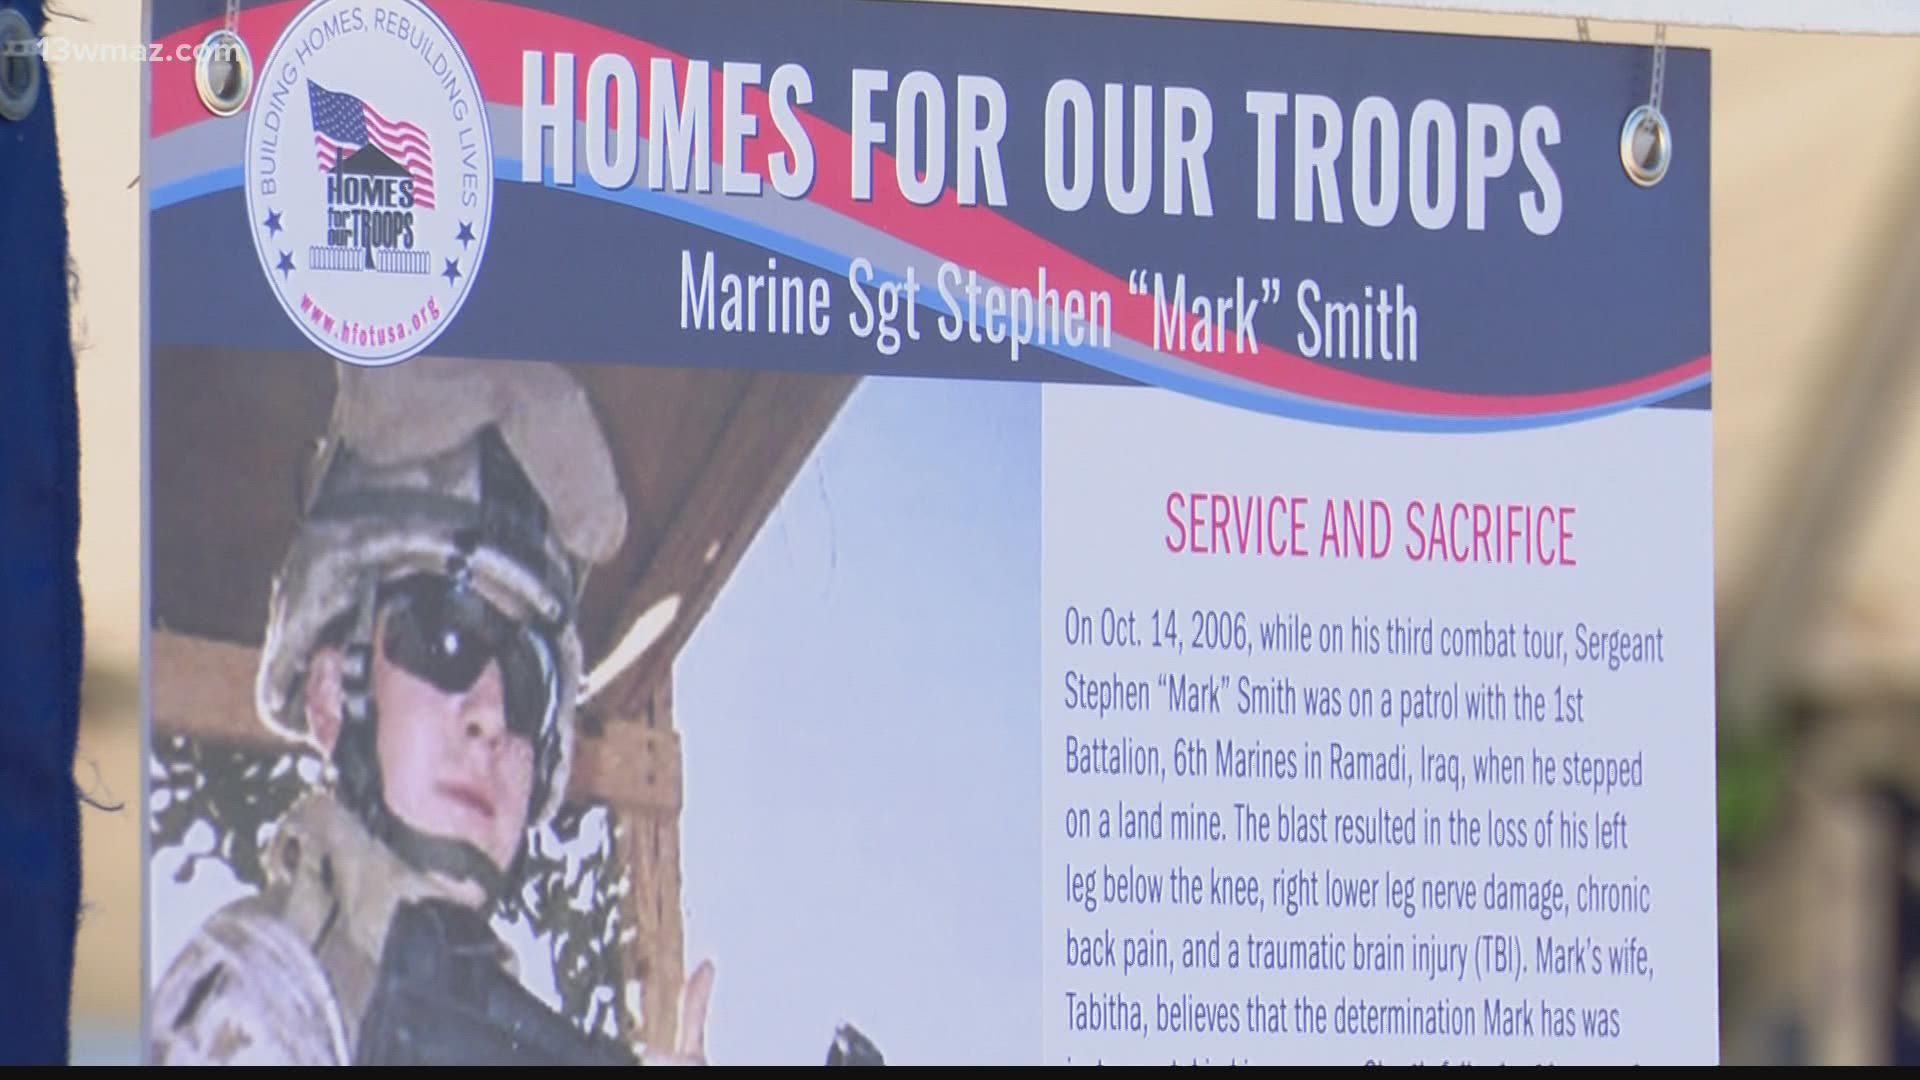 Sgt Mark Smith's new home has more than 40 special features like wheelchair accessible doorways and hallways, and pull down shelving.